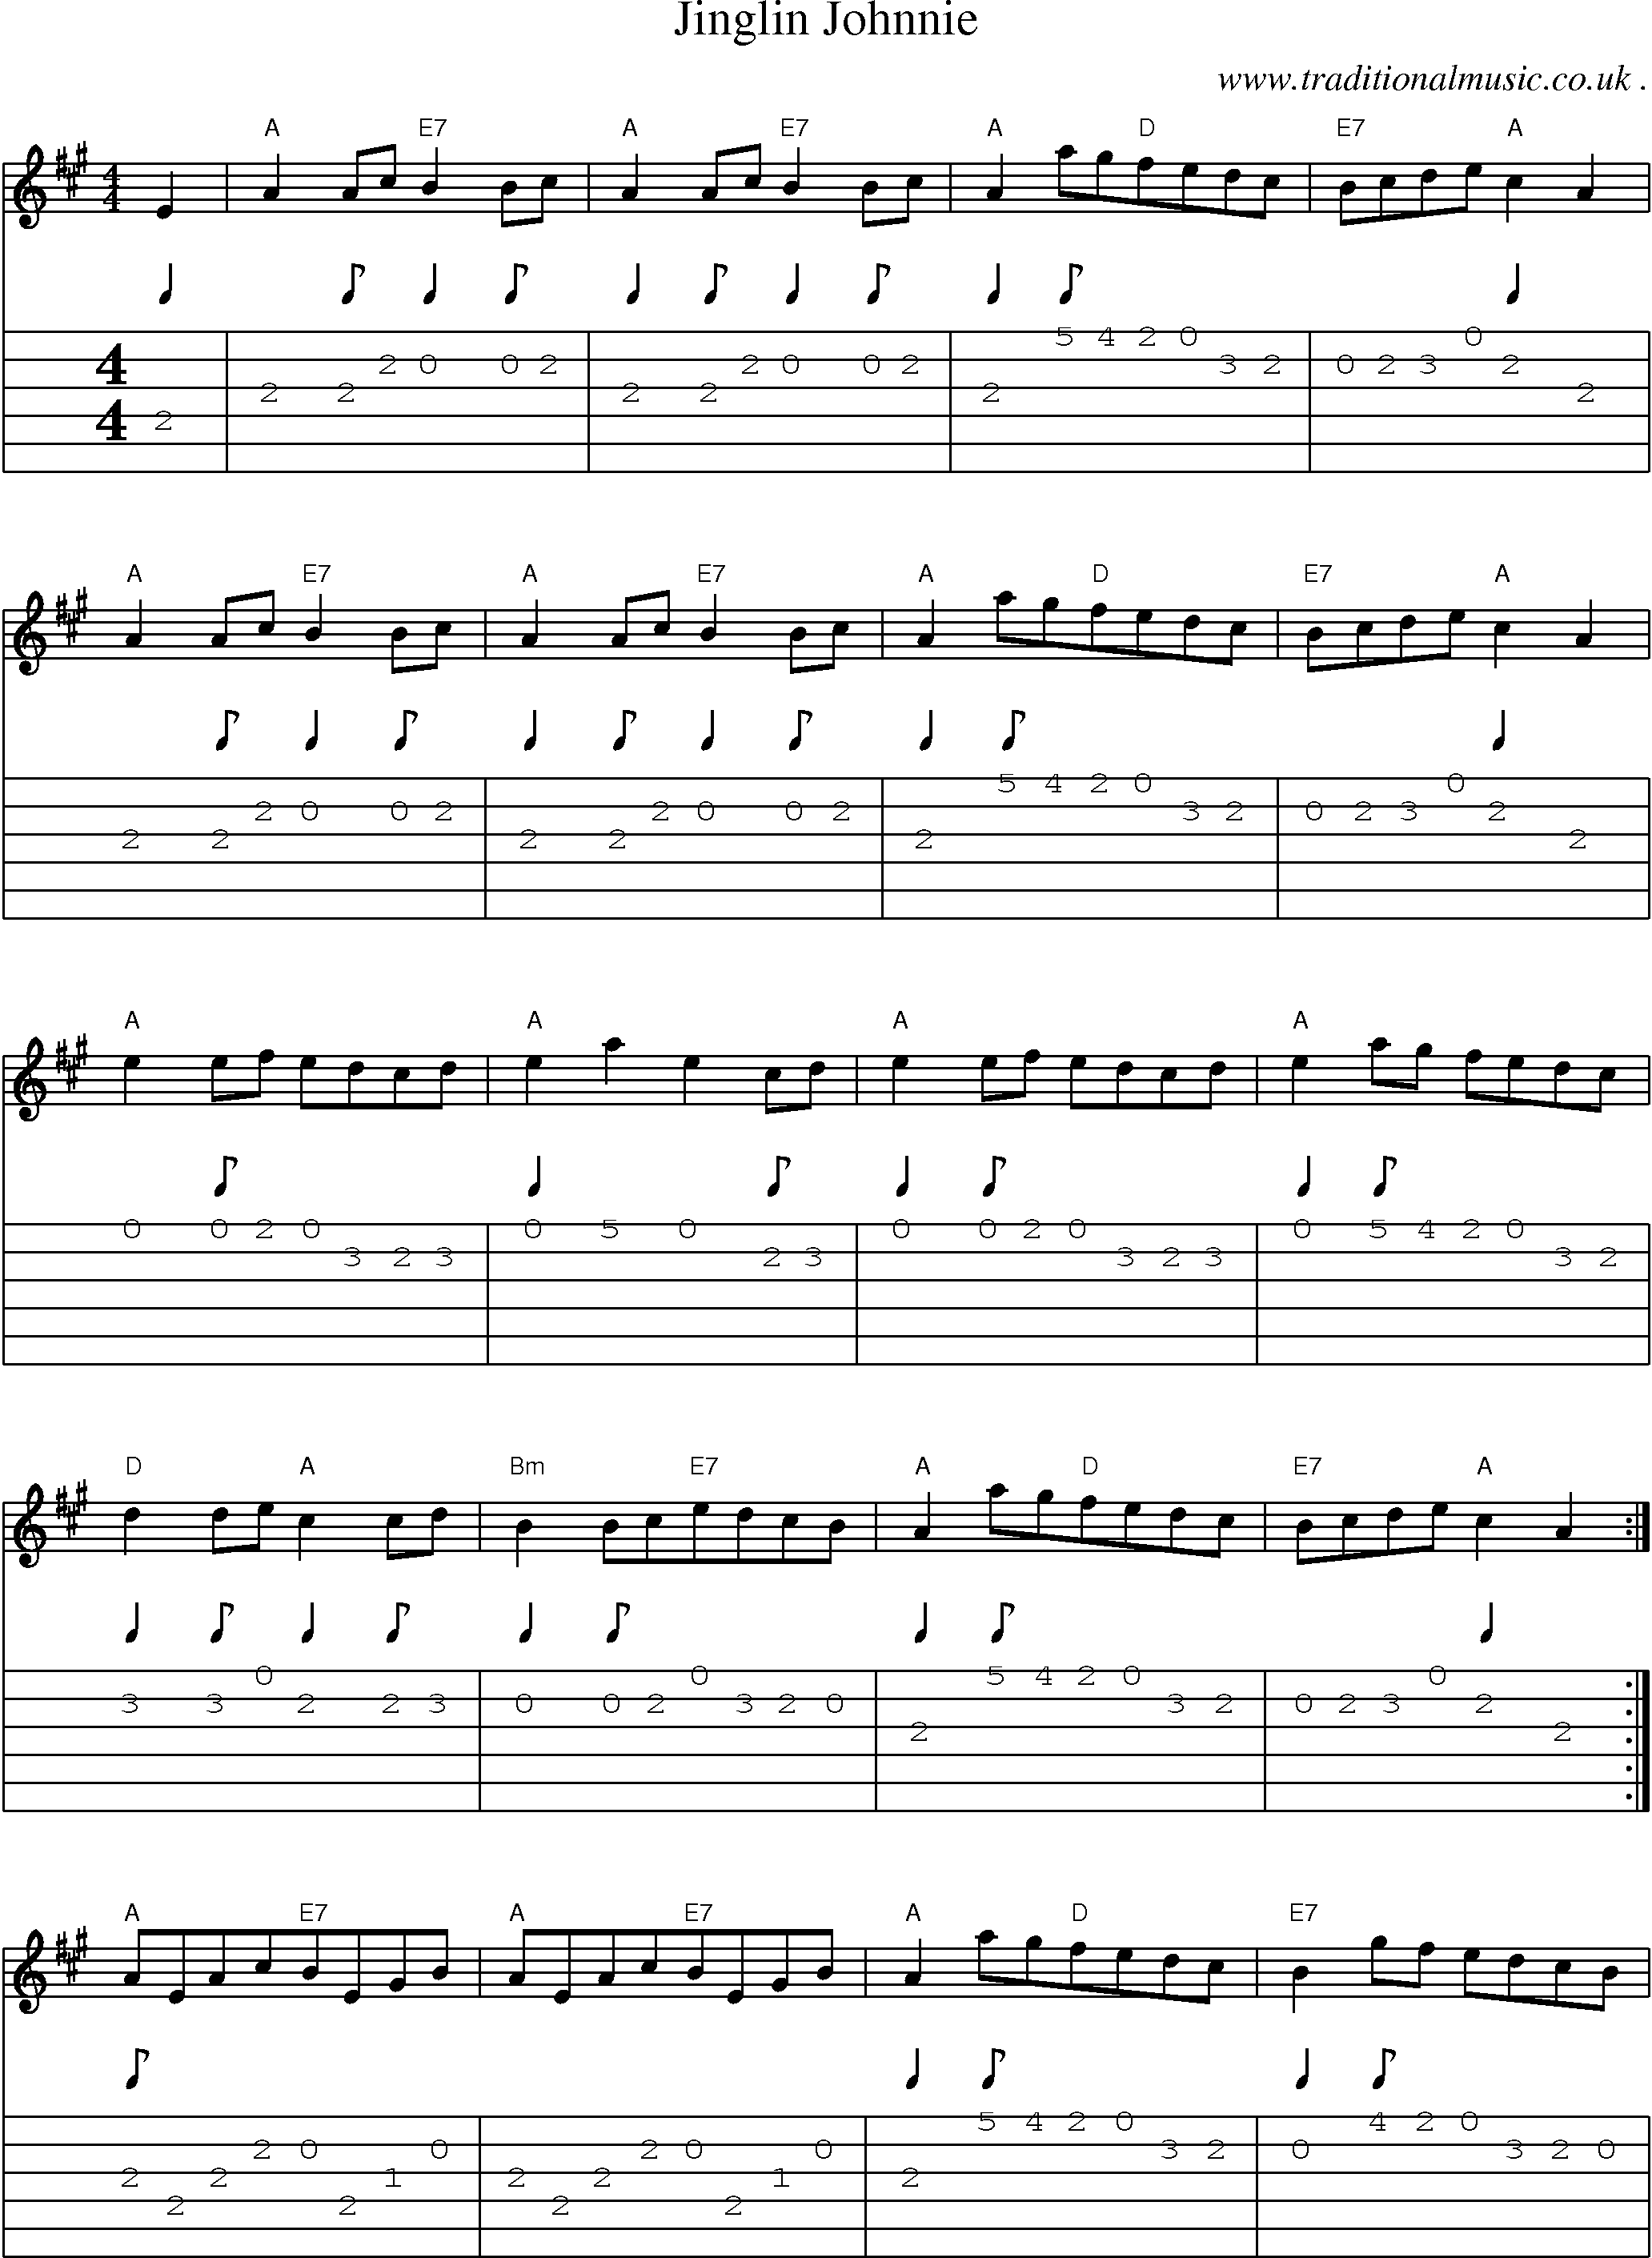 Sheet-Music and Guitar Tabs for Jinglin Johnnie